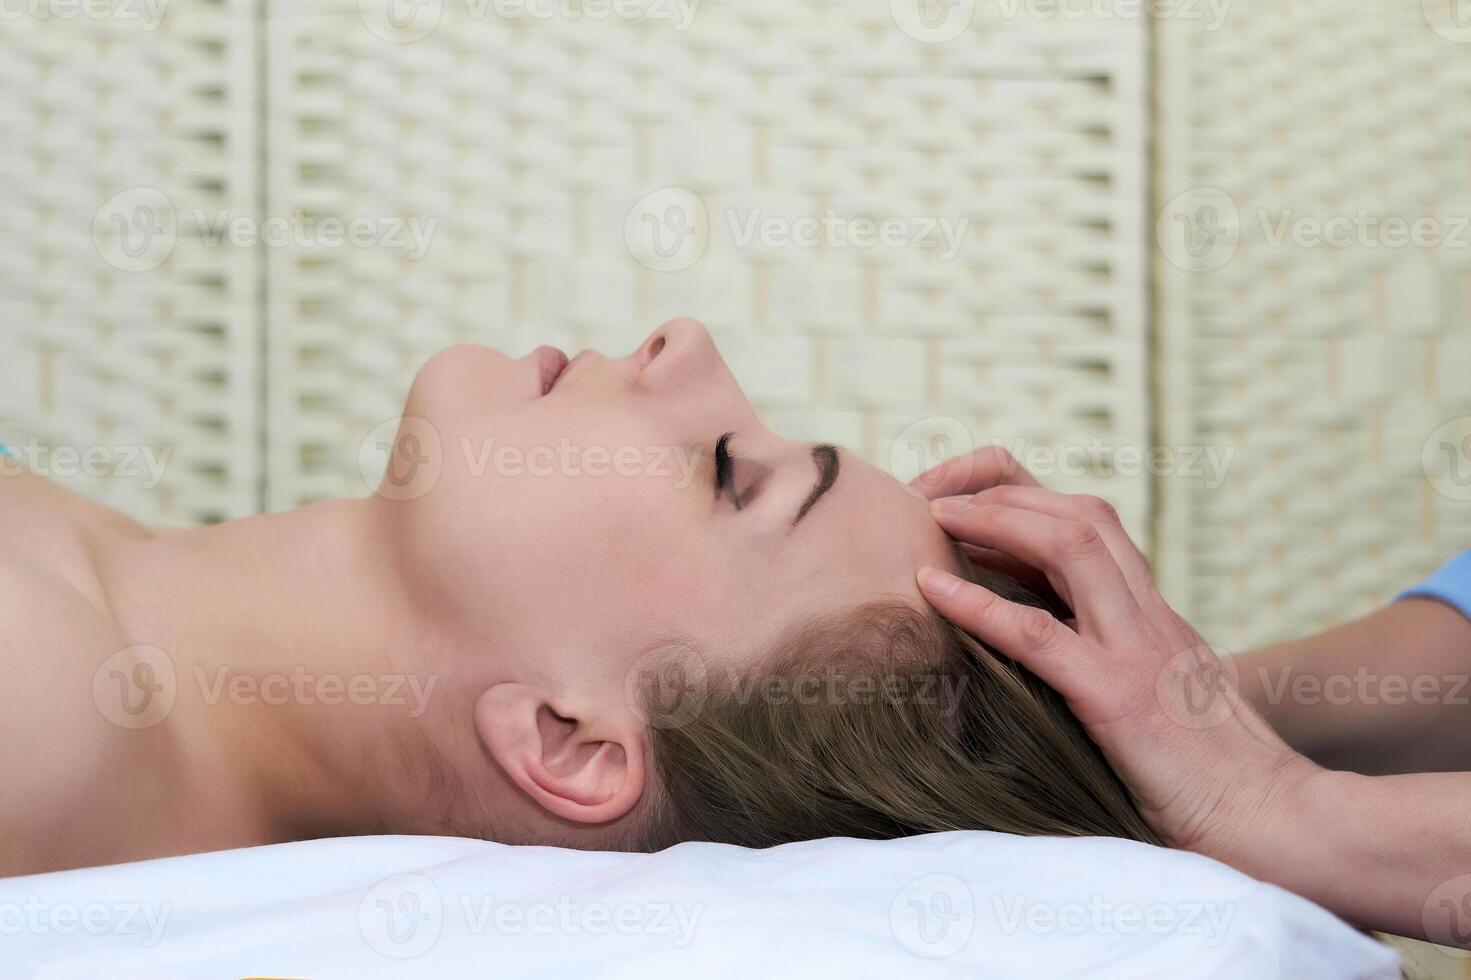 beautiful young woman getting facial massage in the spa salon, close-up portrait, side view photo